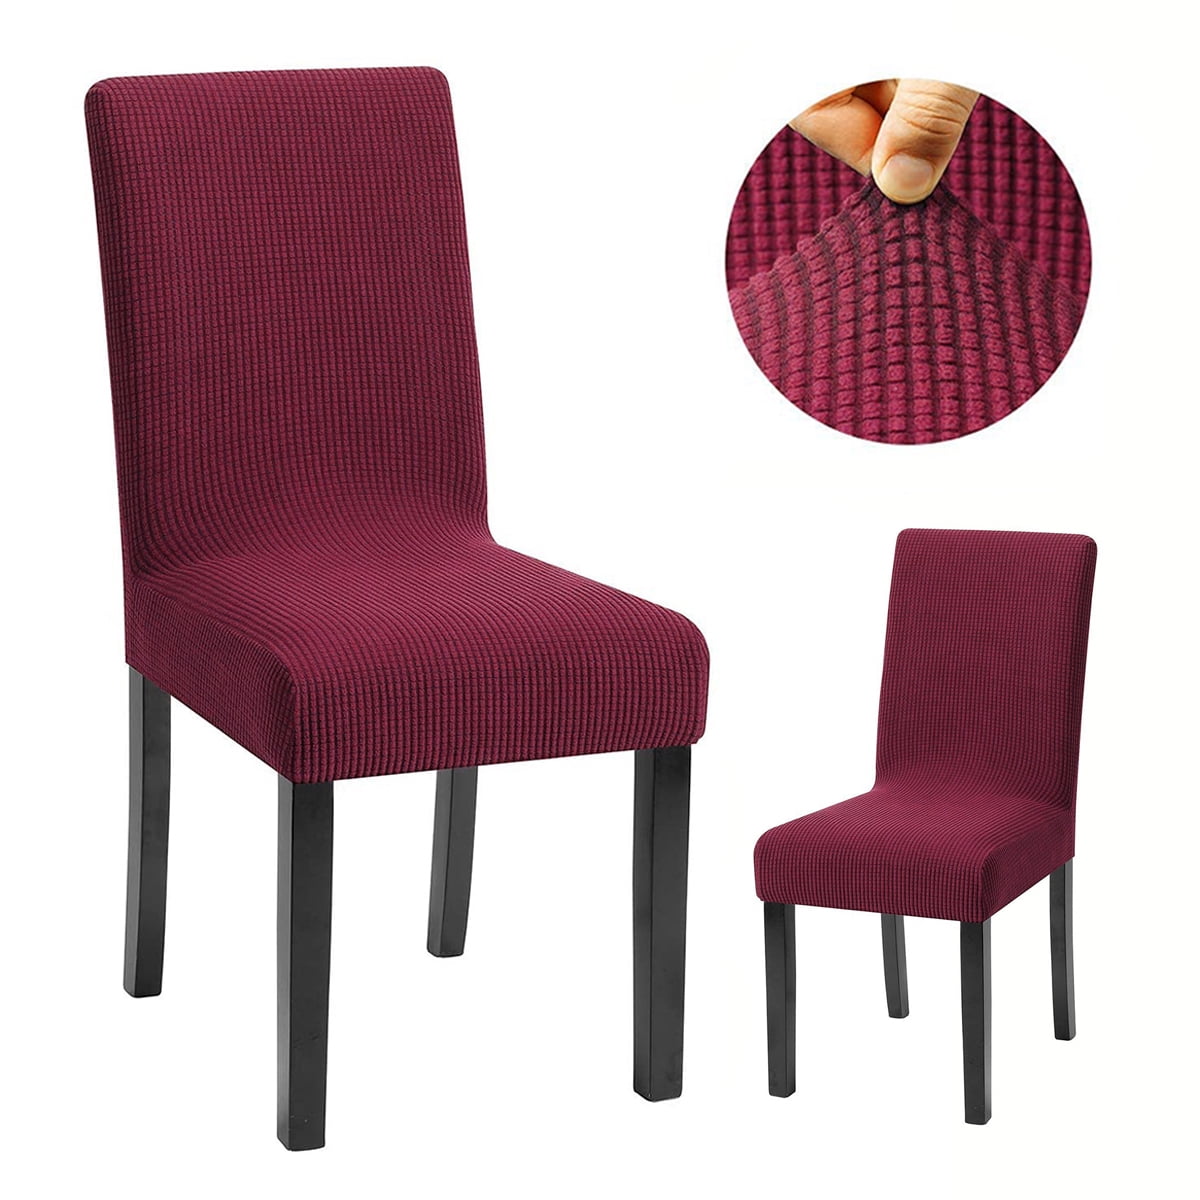 Details about   Removable Stretch Chair Covers Dining Seat Wedding Banquet Kitchen Slip Cover 